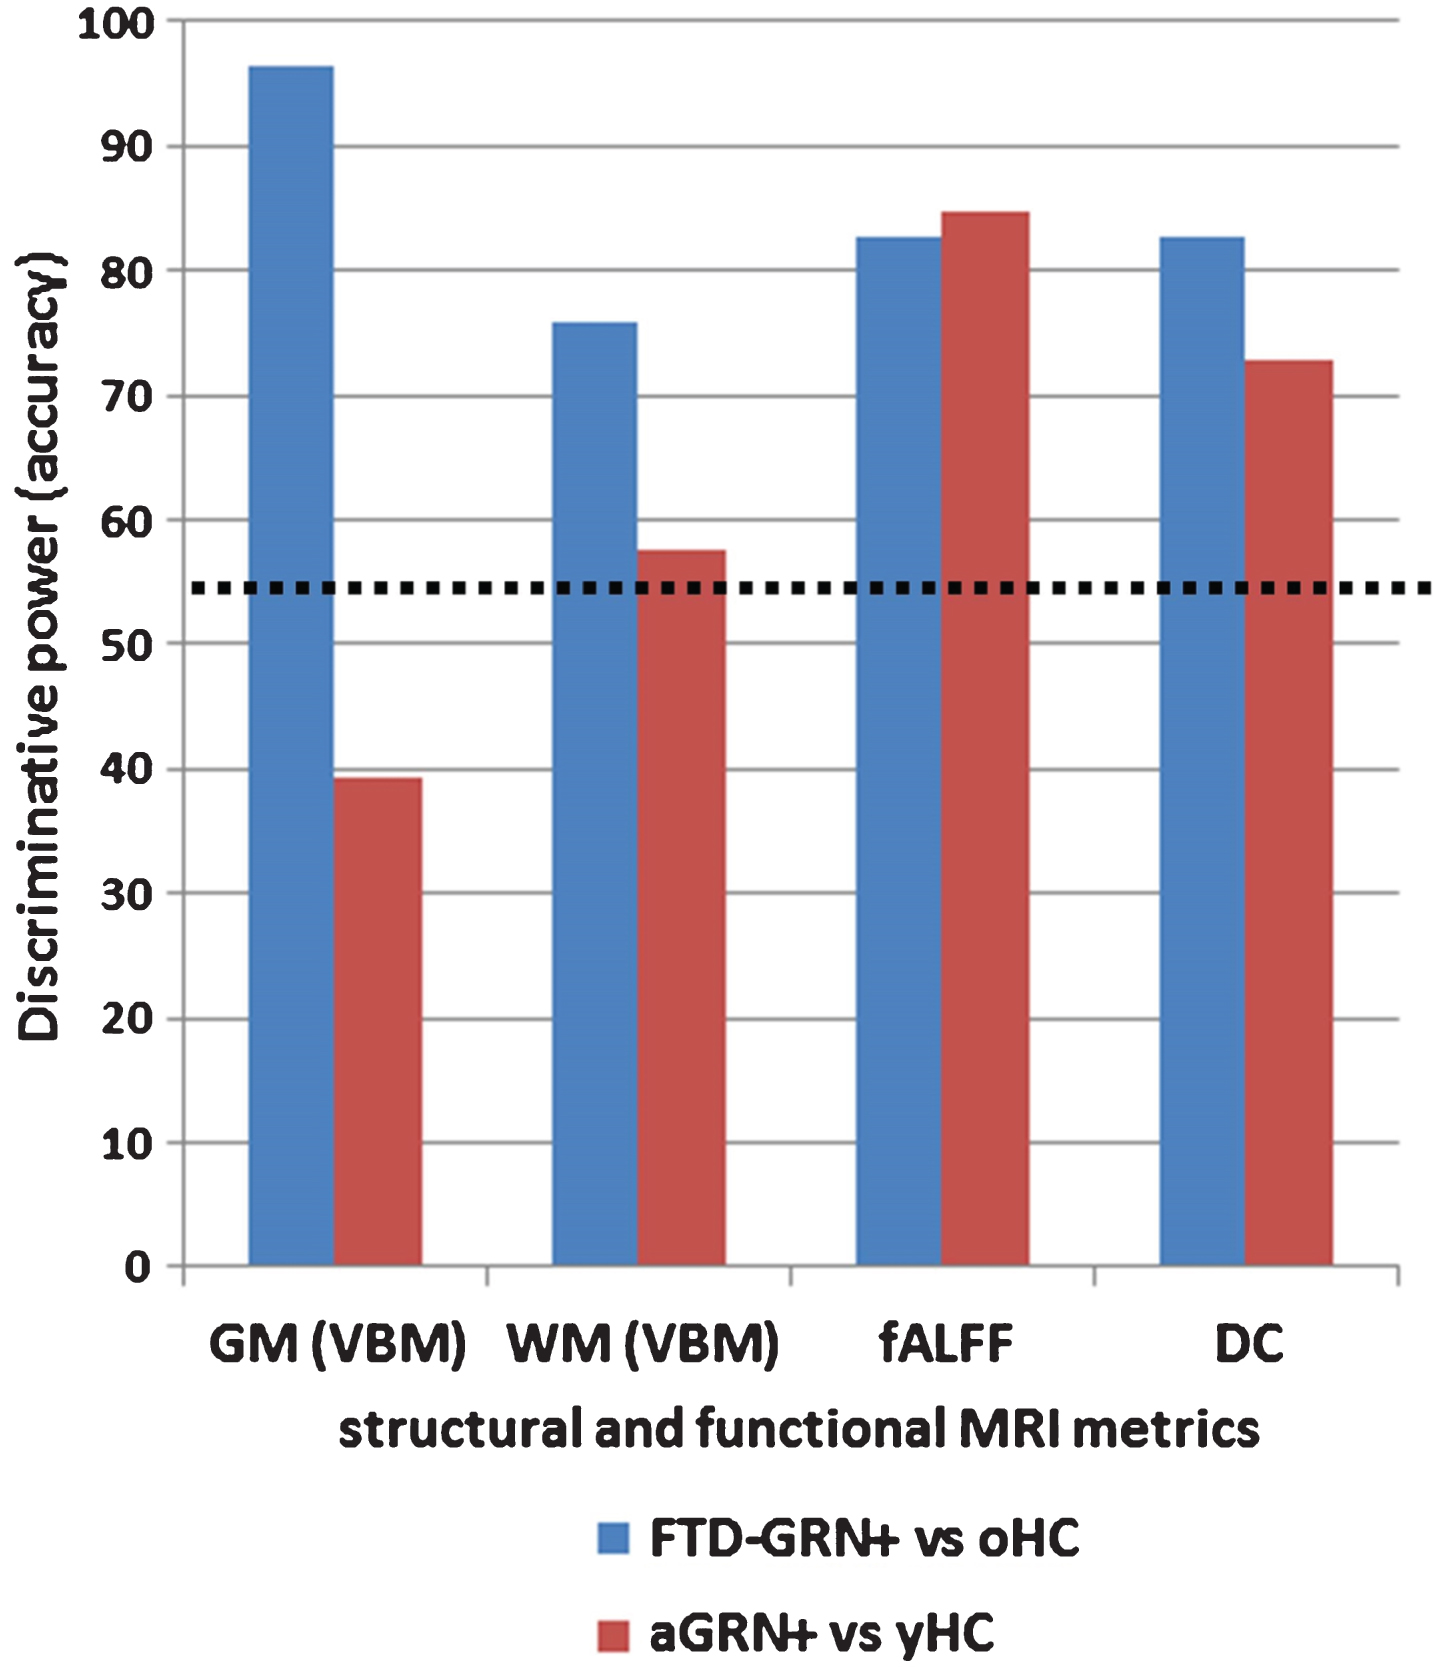 Bar chart showing the classification results (discriminative power) of the different structural and functional measures. The black dotted line represents the significant (>55% of right classification) performance for each measure. Blue is for FTD-GRN+ versus oHC and red is for aGRN+ versus yHC. FTD-GRN+, frontotemporal dementia carrying Granulin mutation; aGRN+, asymptomatic carriers of Granulin mutation; oHC, old healthy controls; yHC, young healthy controls; GM, grey matter; WM, white matter; VBM, voxel based morphometry; fALFF, fractional amplitude of low frequency fluctuations; DC, degree centrality.